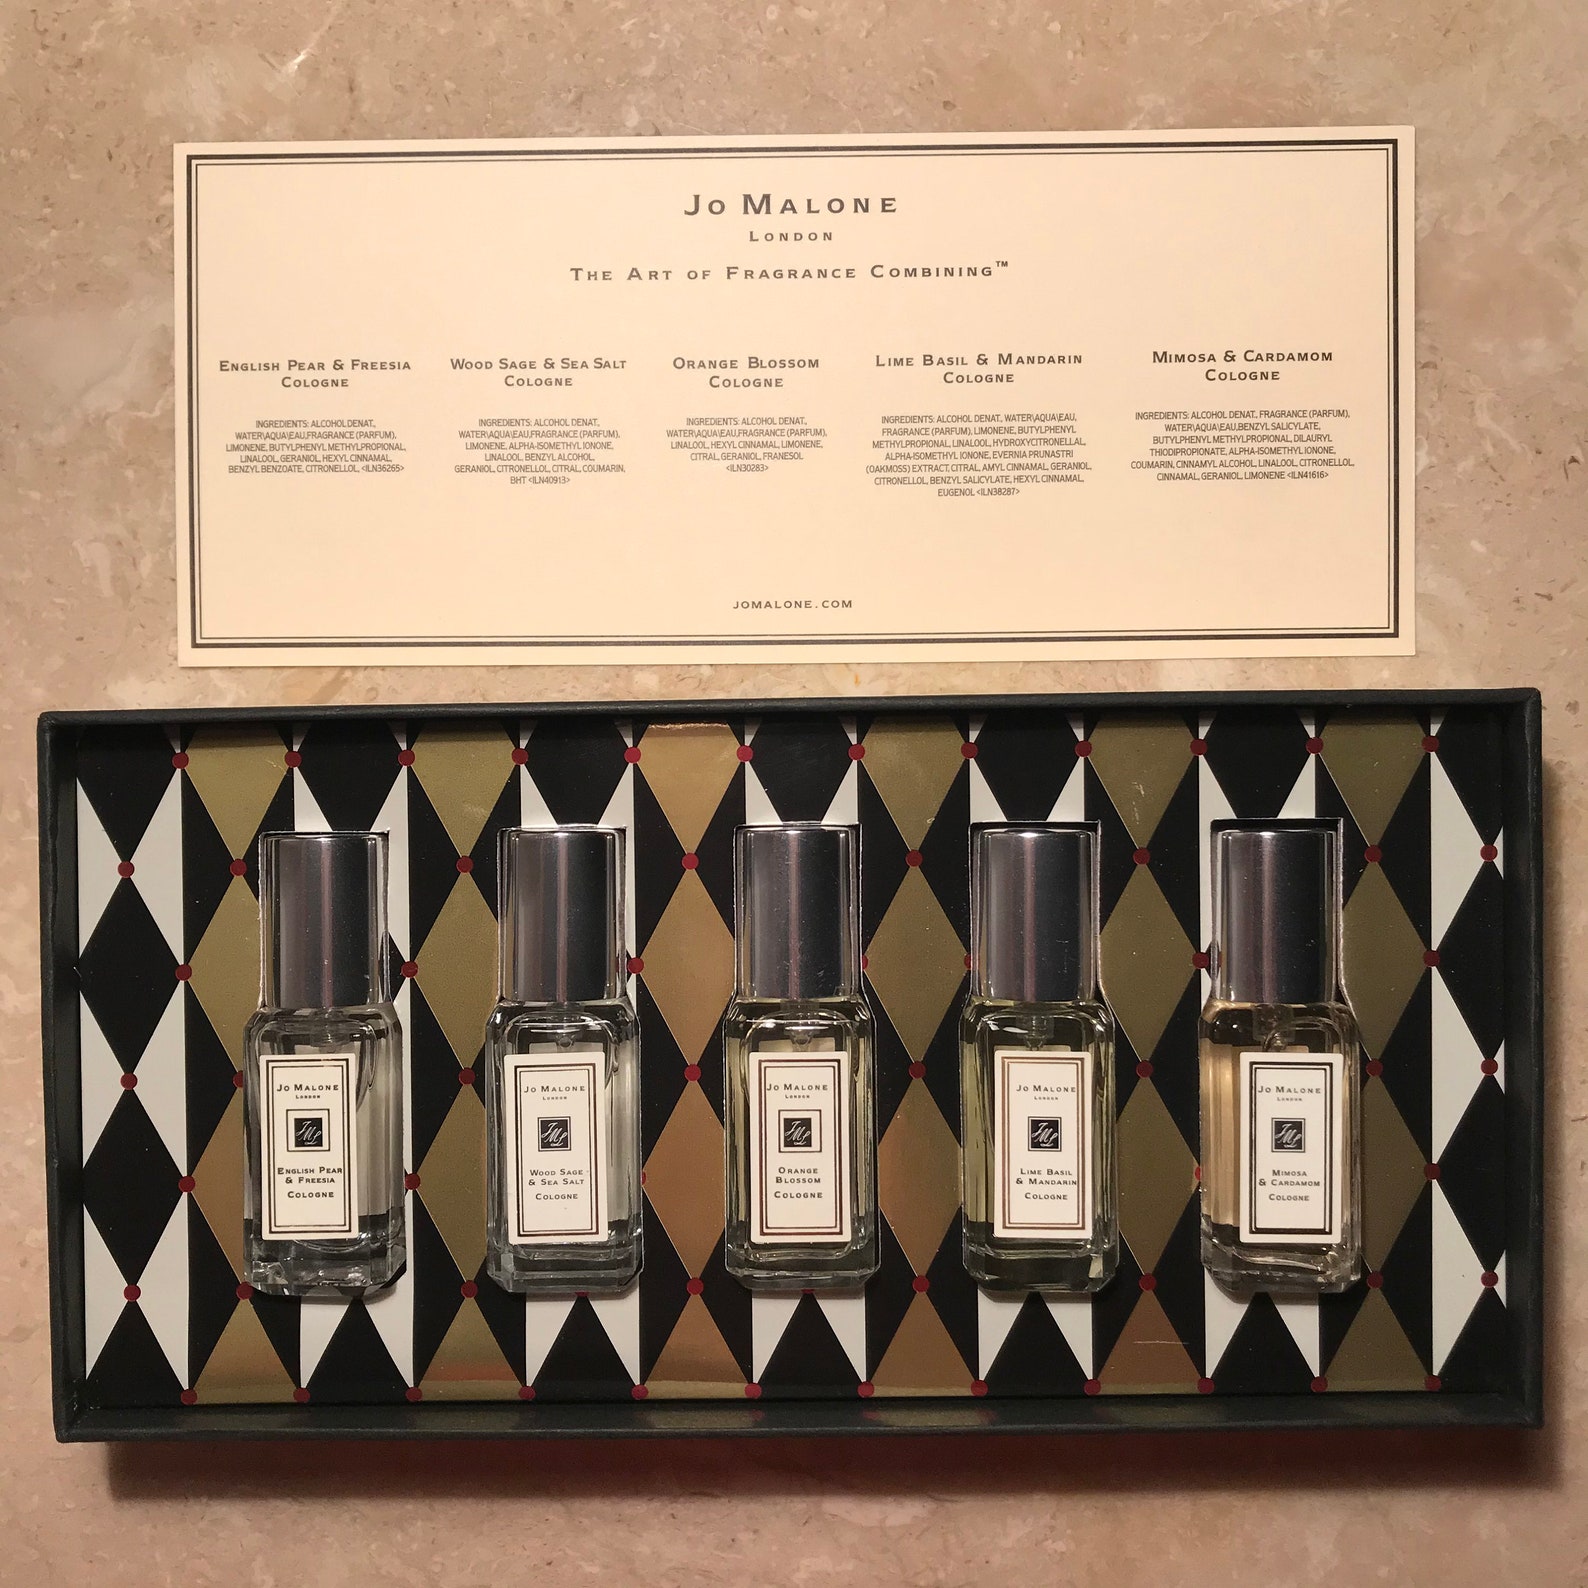 New Jo Malone cologne Fragrance Combining Set 5 Piece 9 ml | Etsy